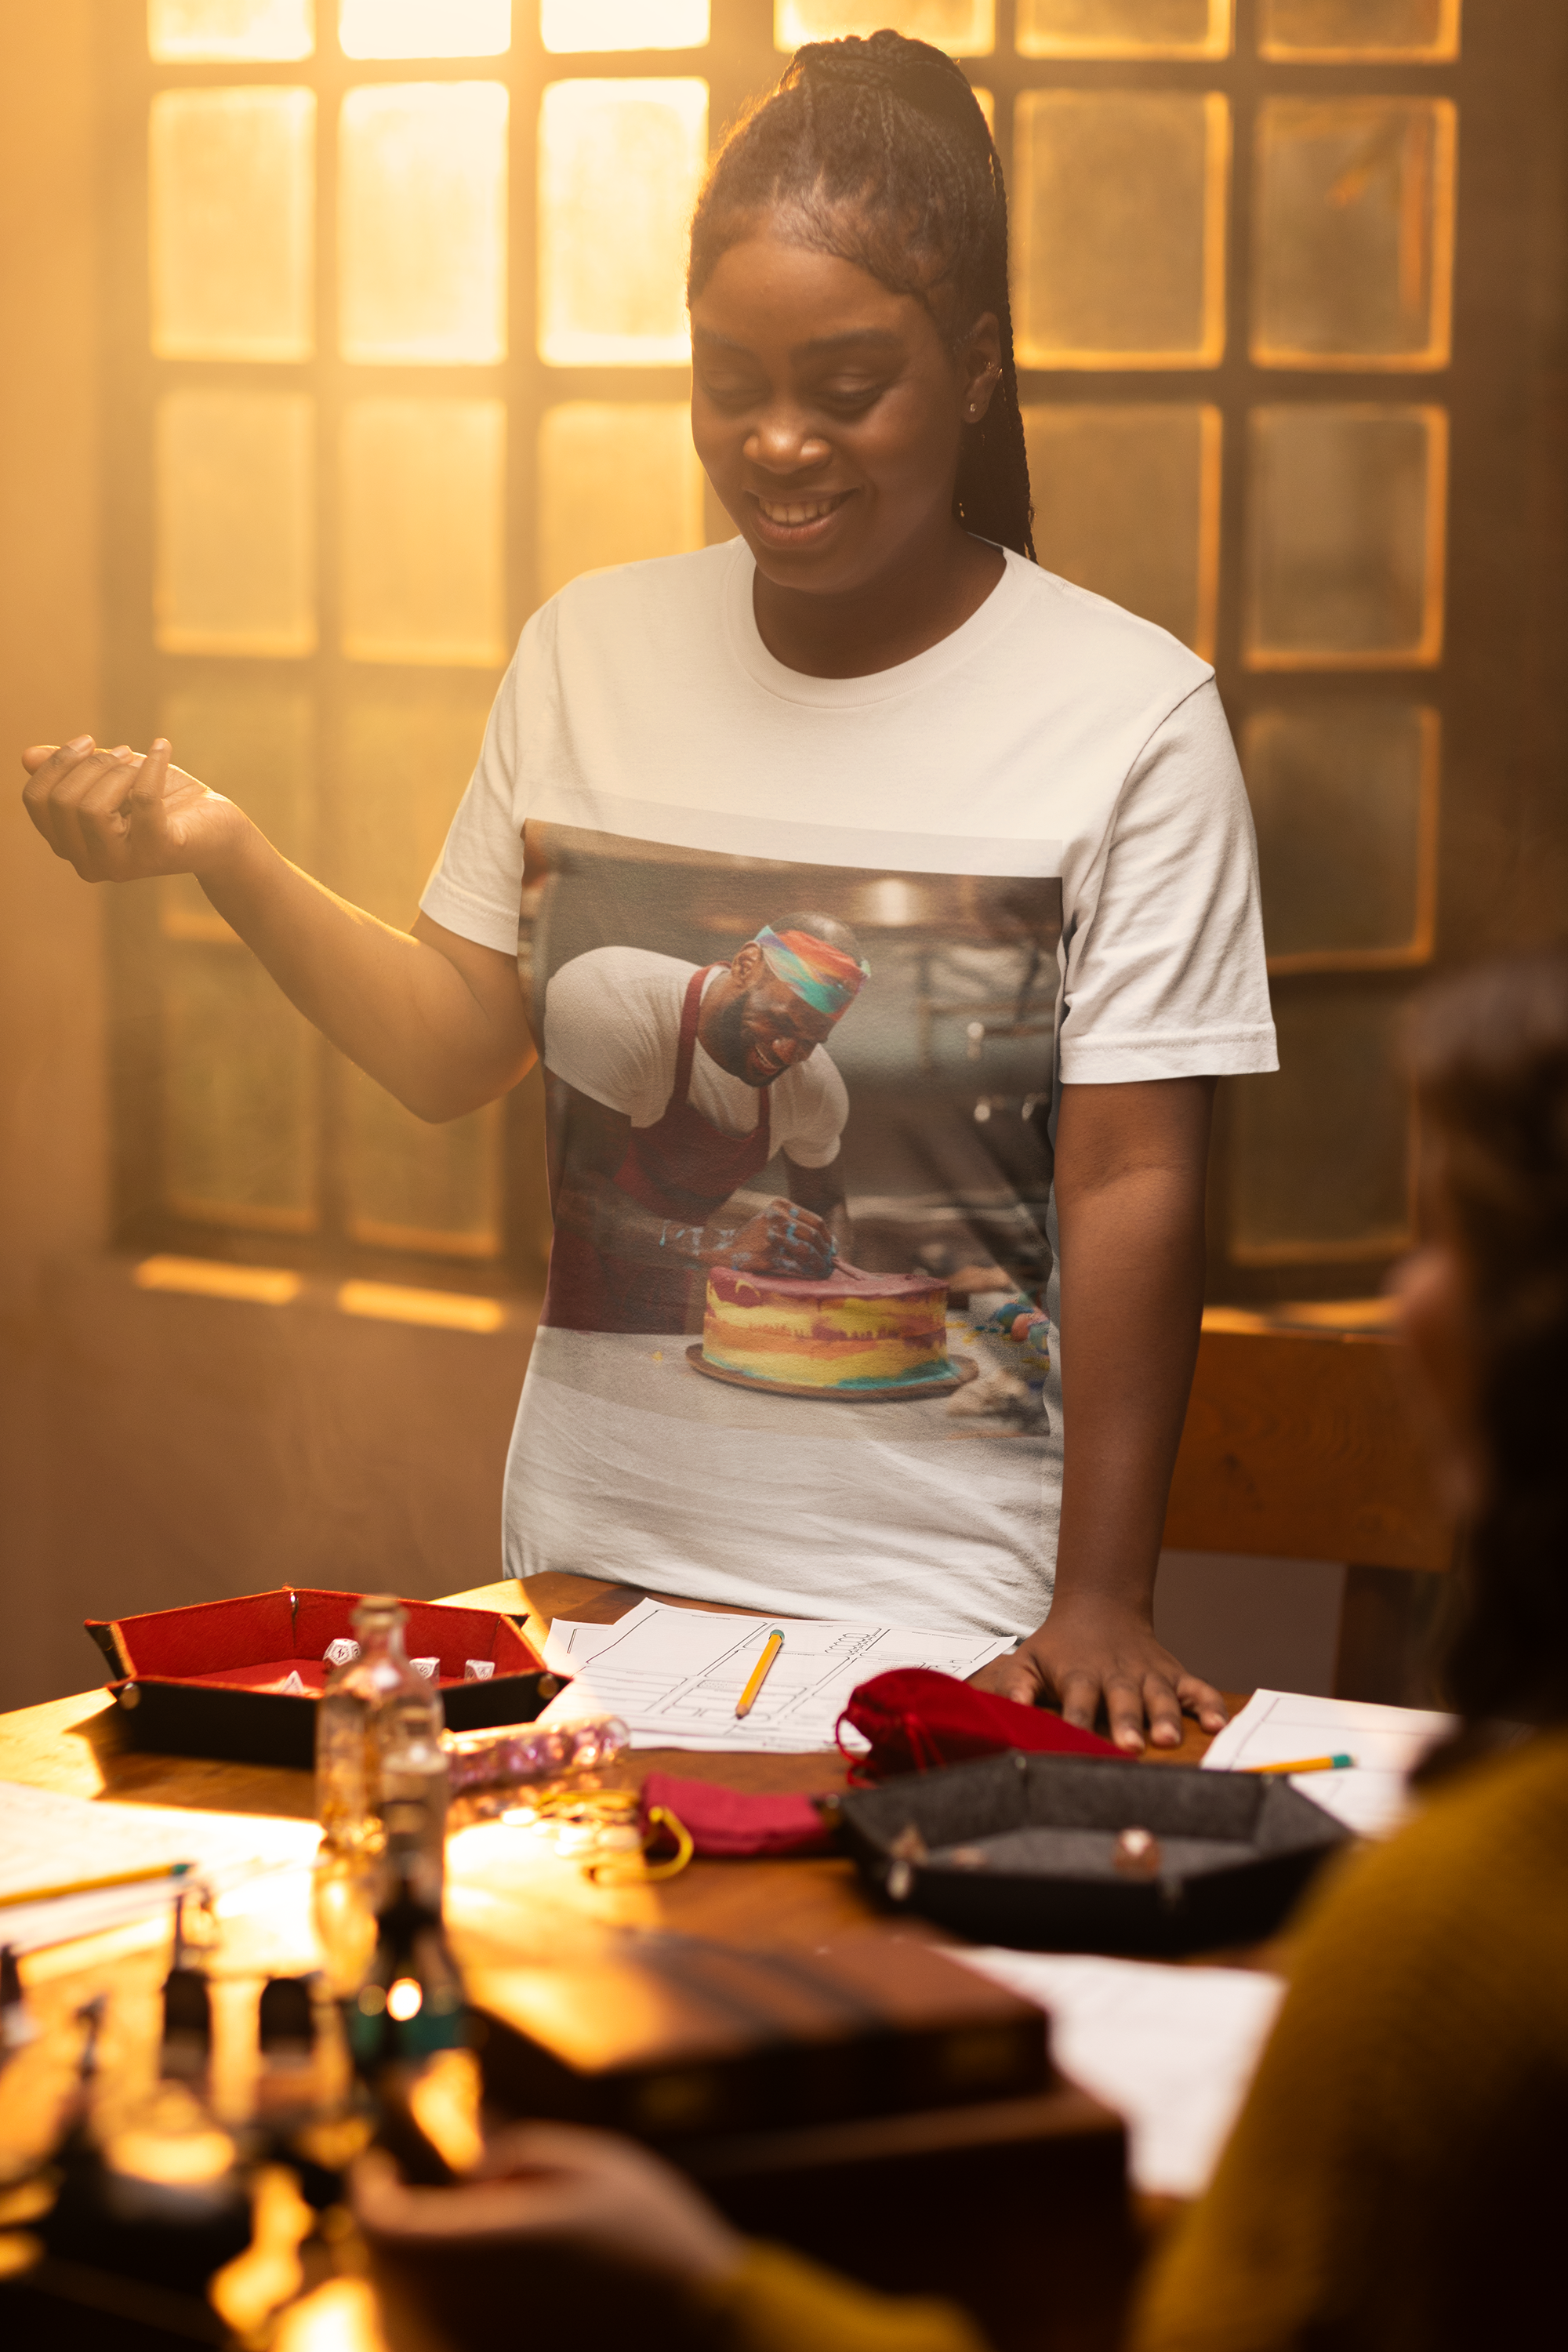 The photo features a stylish unisex garment-dyed t-shirt in a rich, inviting color. On the front, a unique design cleverly combines elements of basketball and baking, symbolizing the fusion of sports and culinary arts. The tee offers a relaxed fit, perfect for those who value comfort and style.